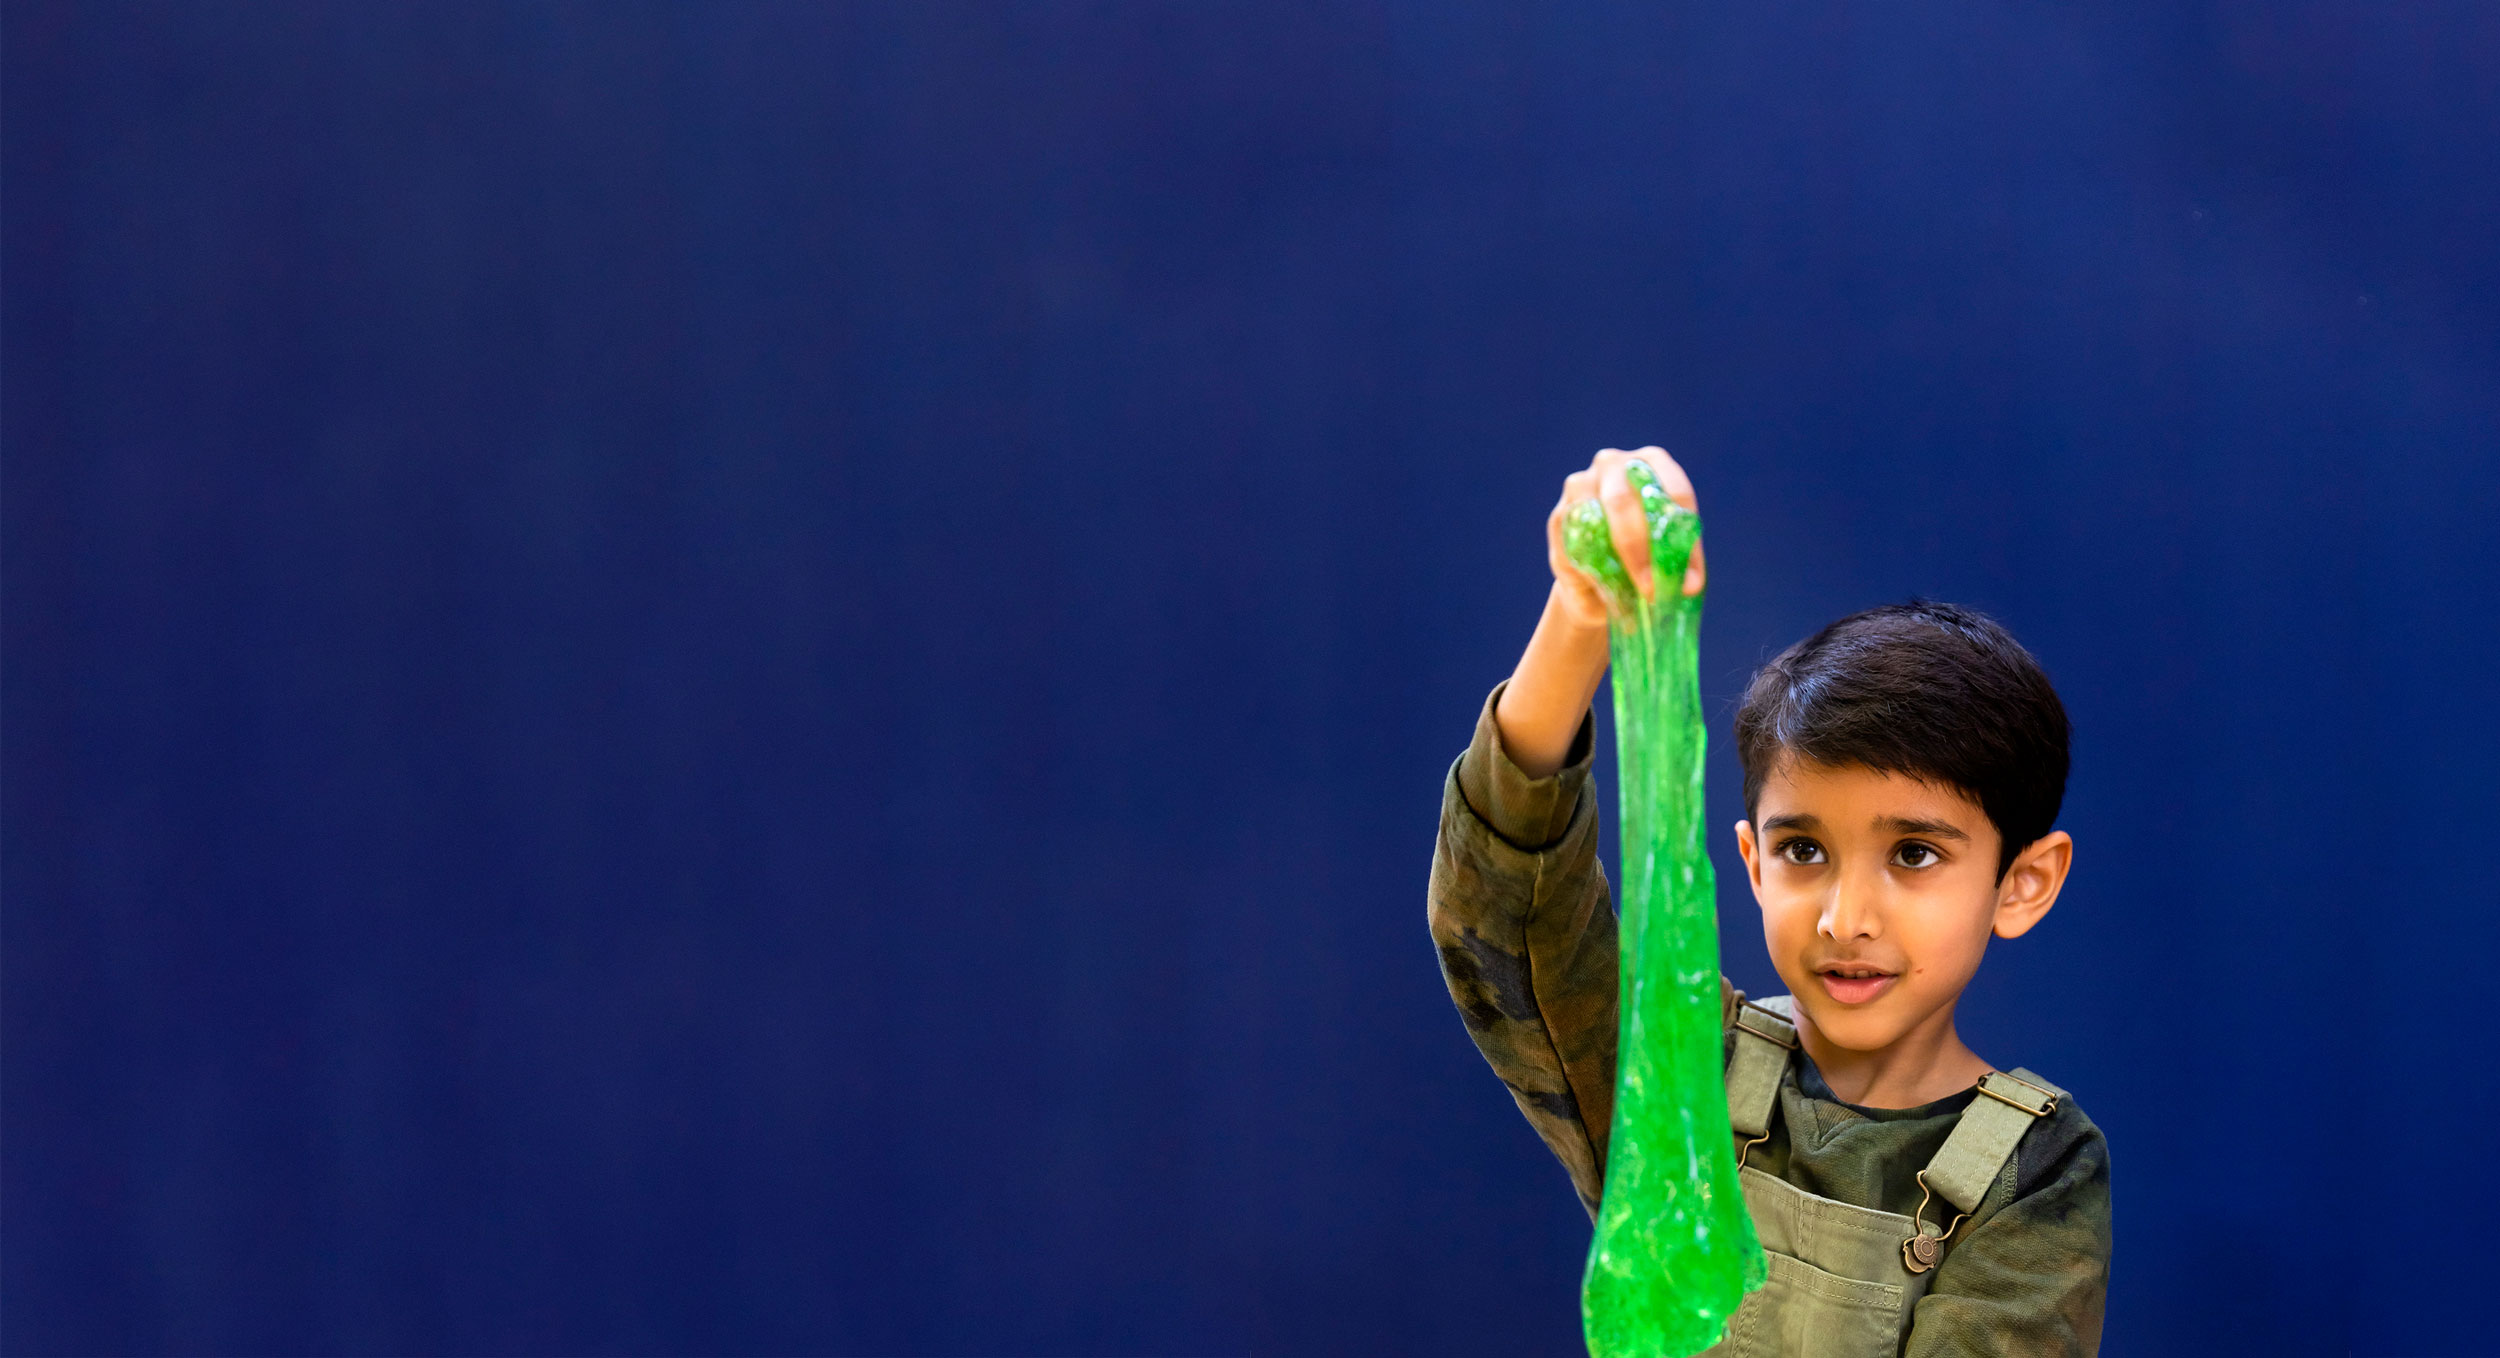 A child is holding up and examining green slime during a science activity